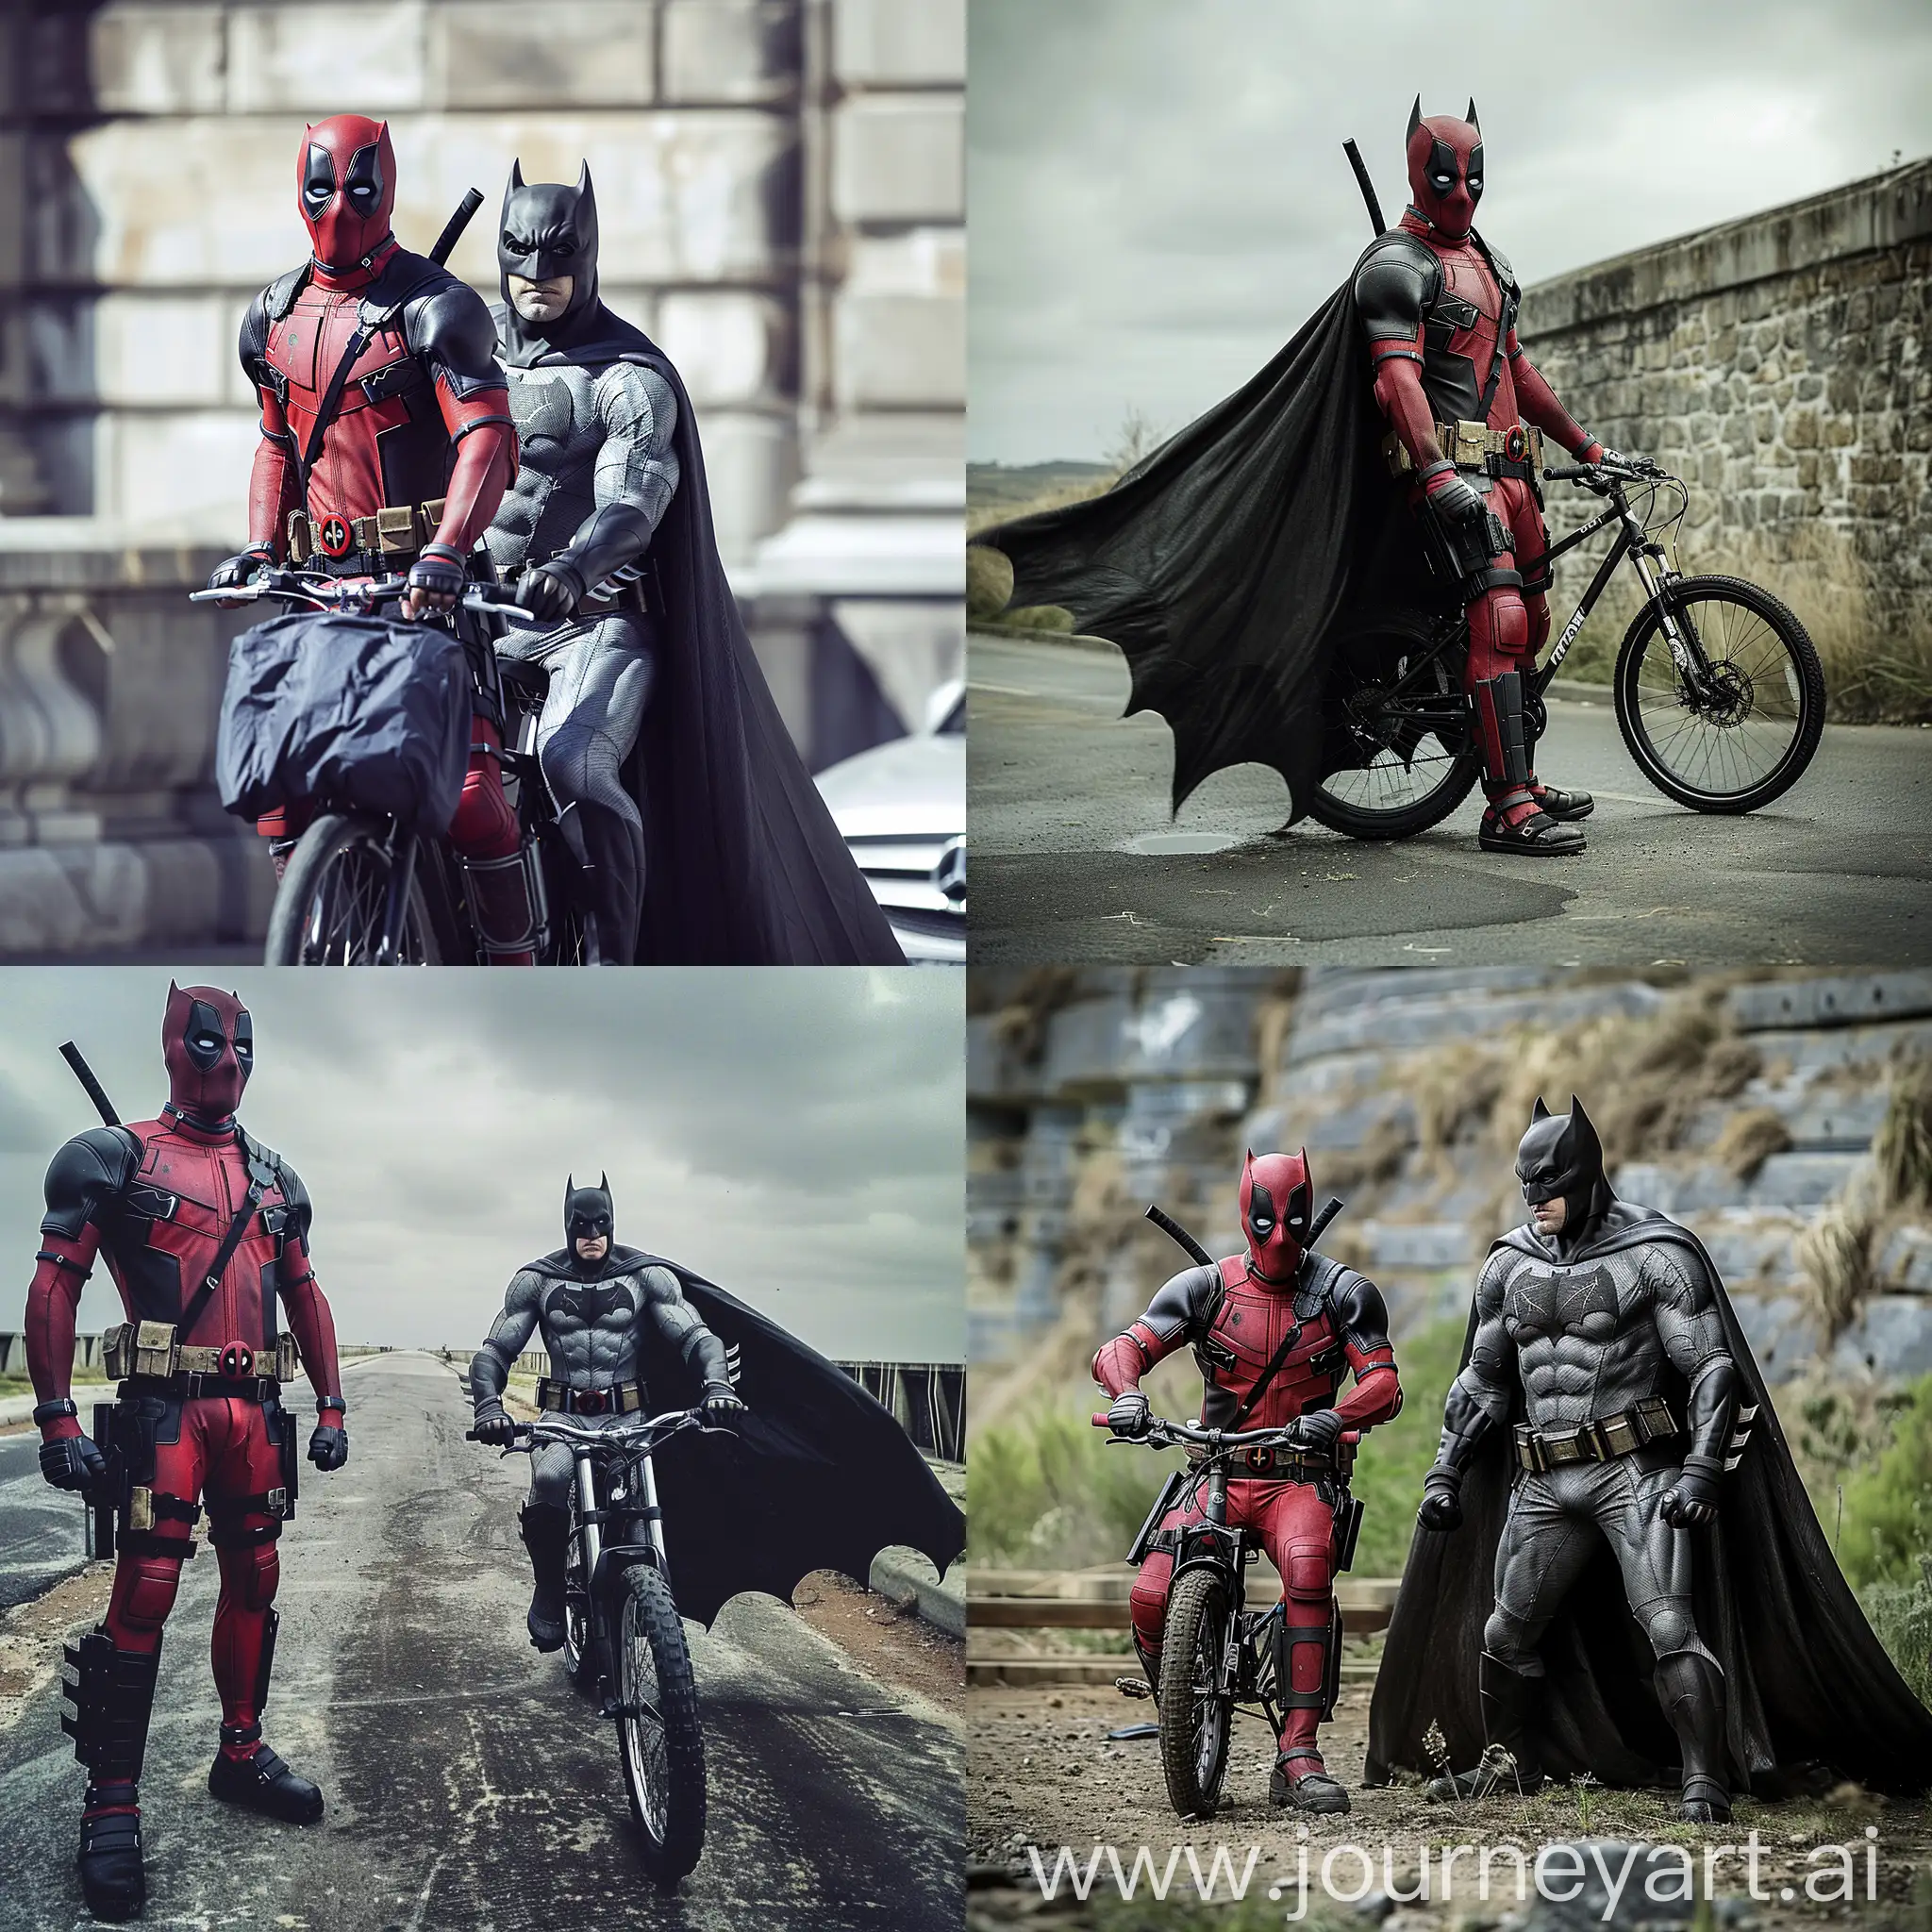 Deadpool-and-Batman-Riding-Motorcycle-Together-in-ActionPacked-Scene